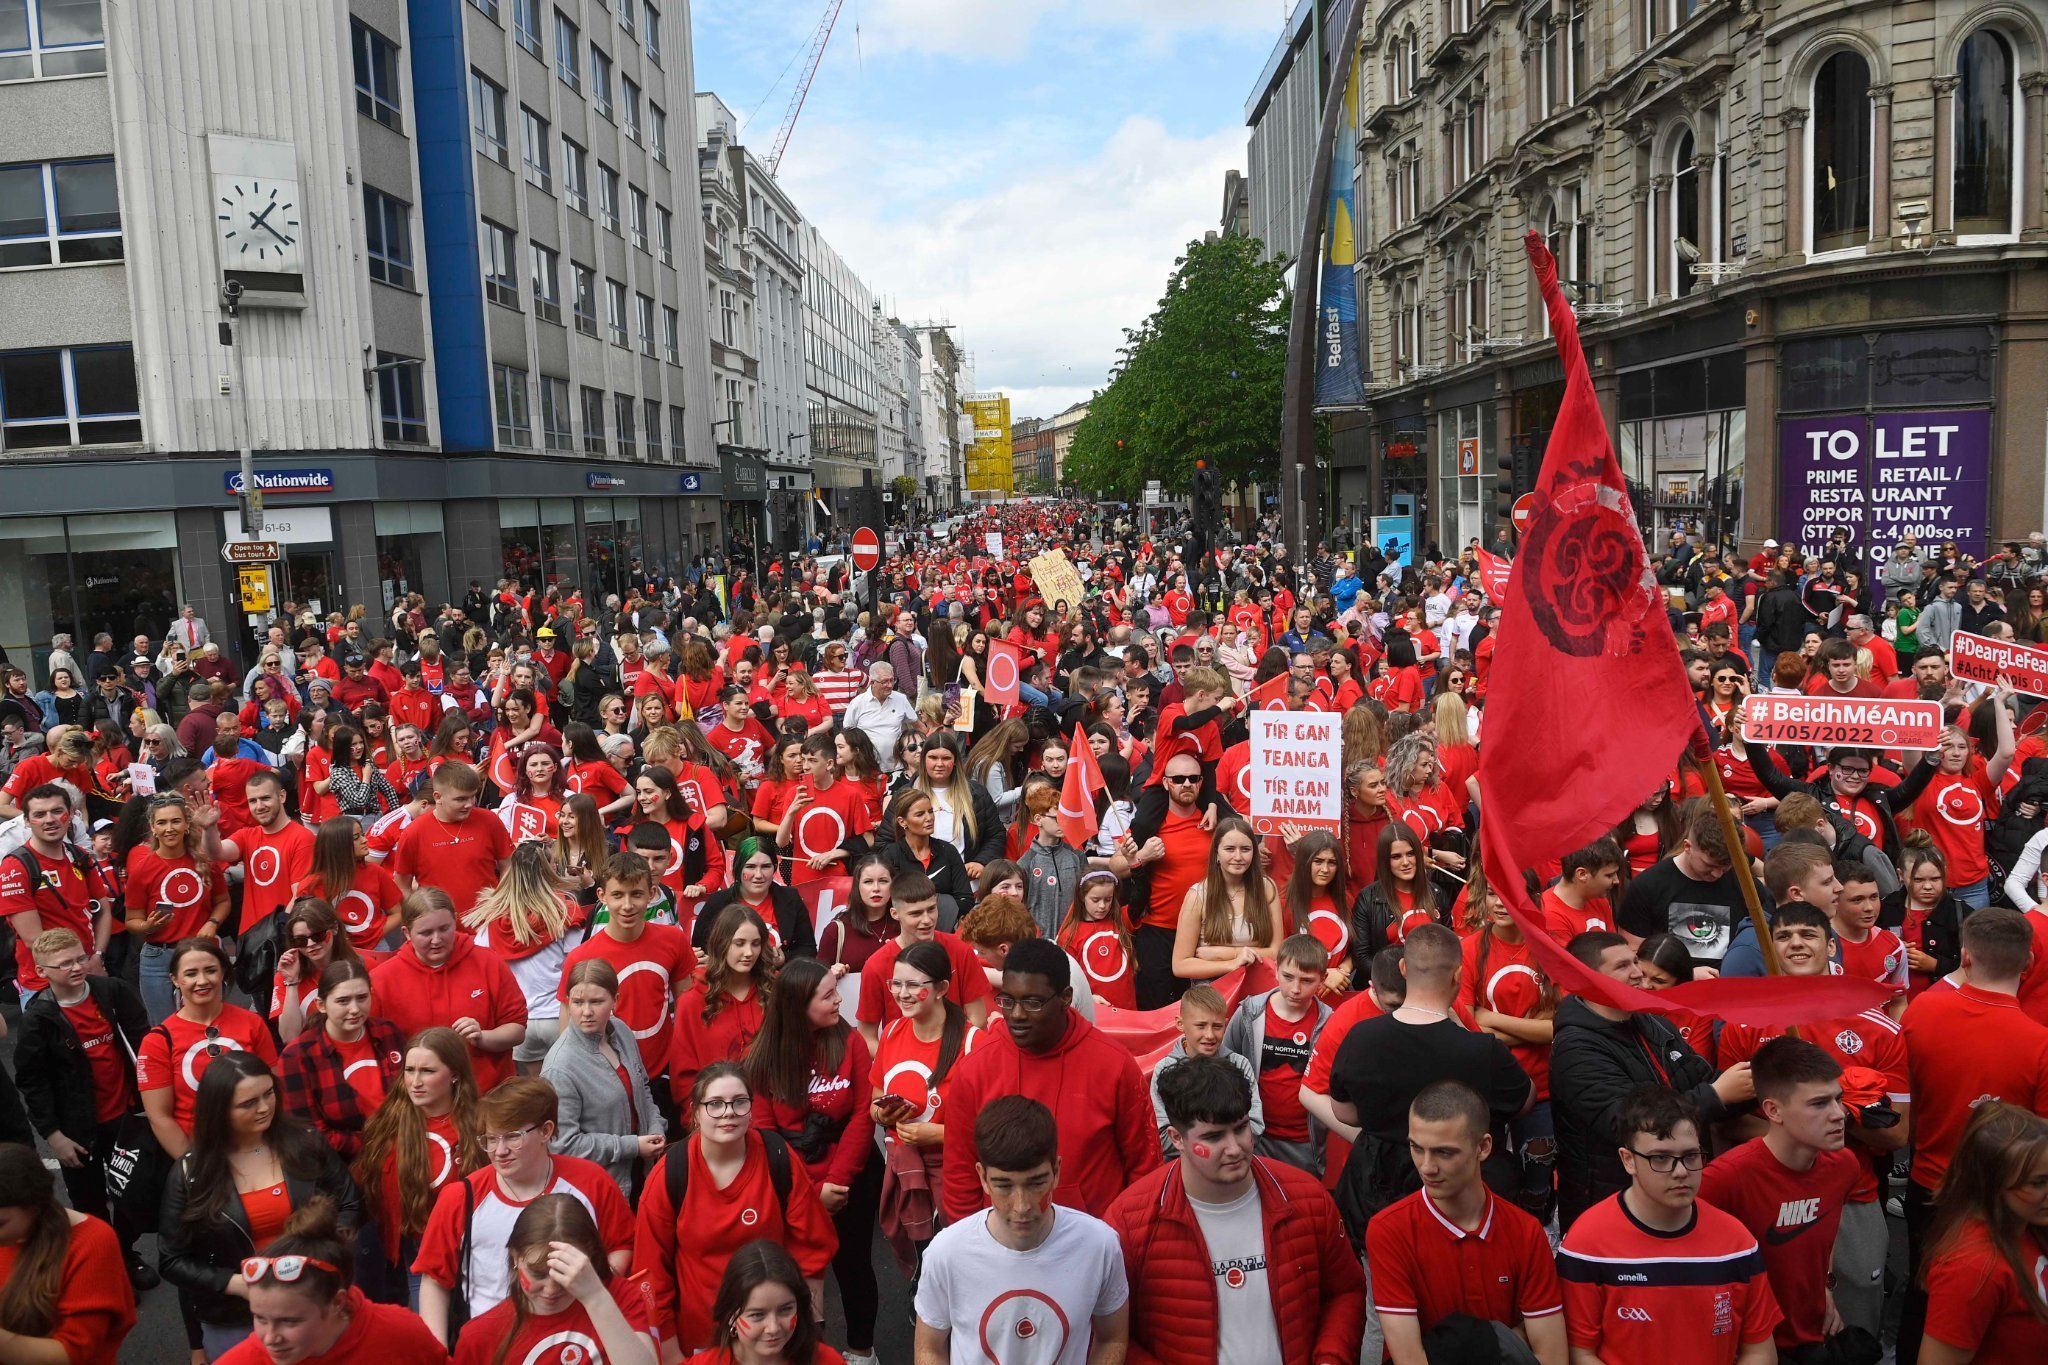 NO MORE DELAYS: An Dream Dearg have become synonymous with campaigning for the Irish language